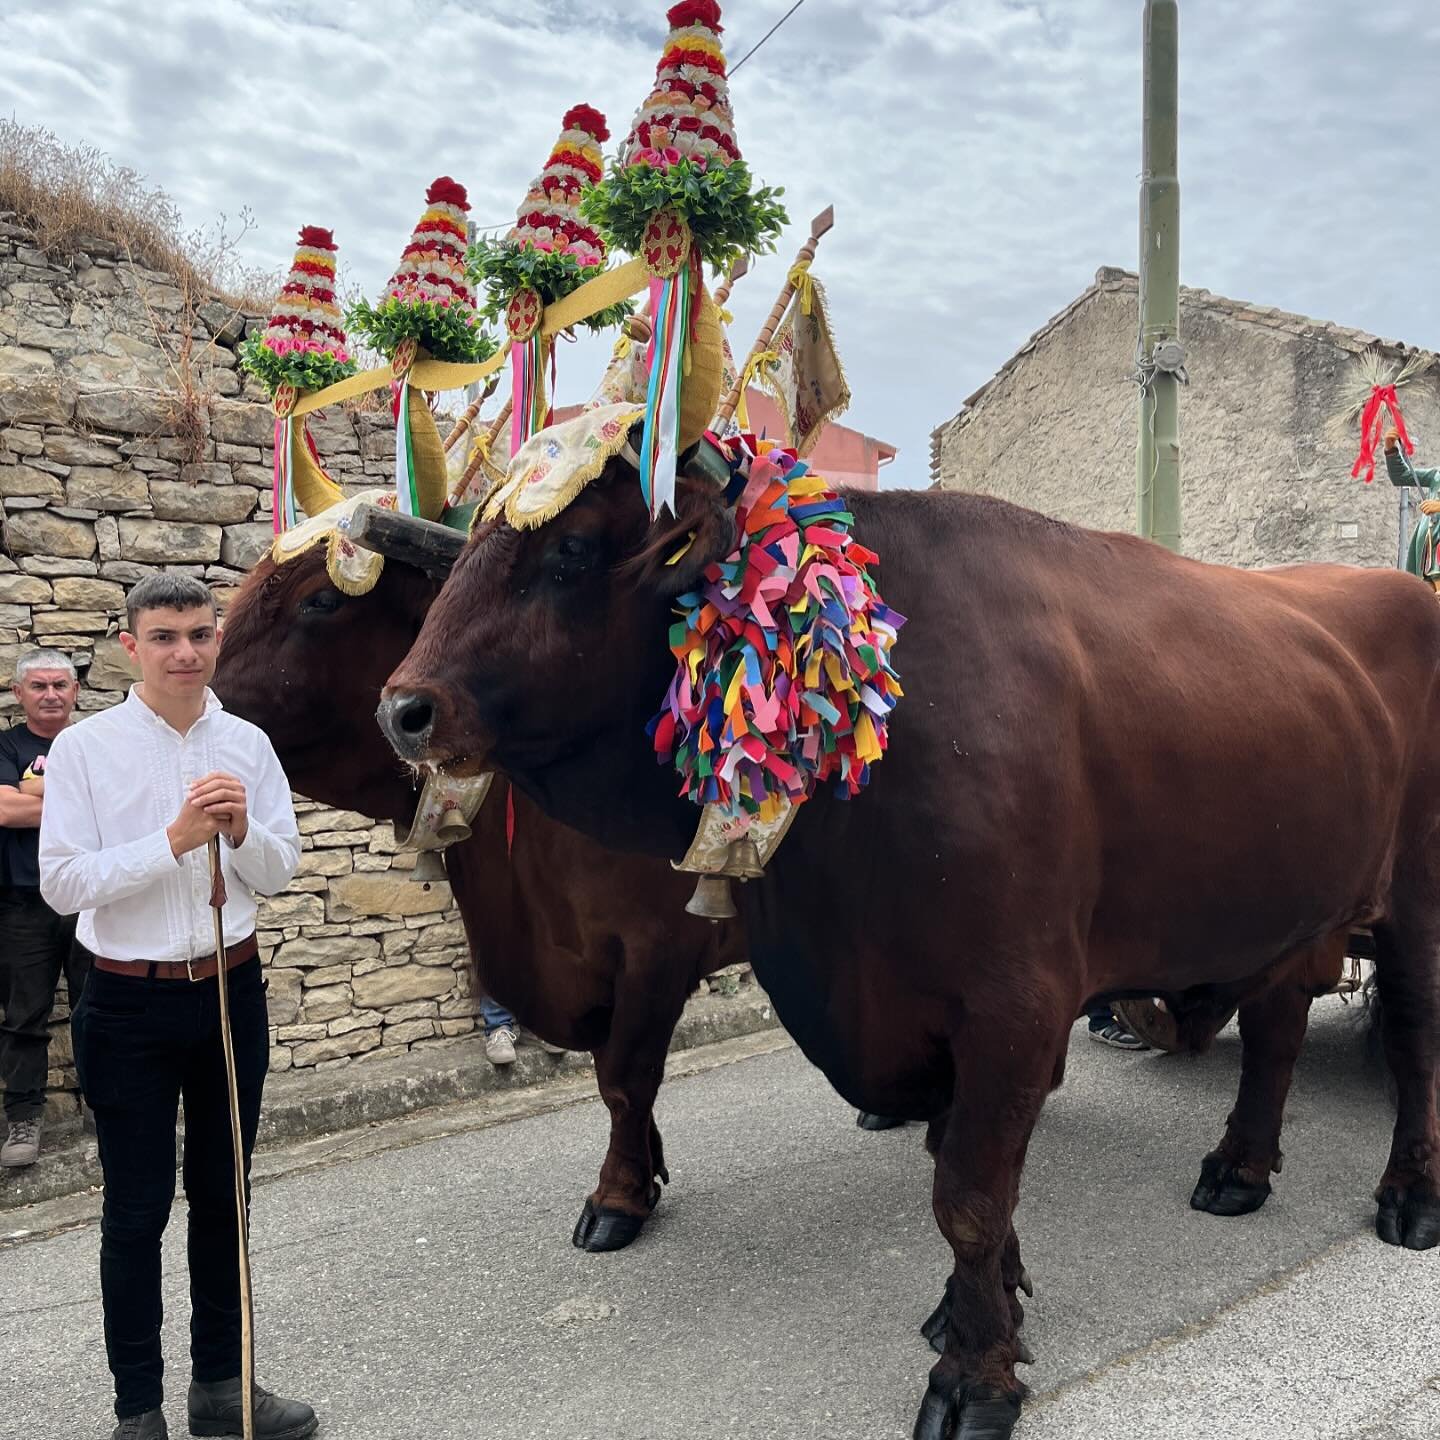 Processions, oxen and an Almond Festival plus Sardinian textiles from the Casa Museo in Pabillonis, a small agricultural town in south - my last day in Sardegna! The people are peaceful, hard working and generous. They love their communities and cult